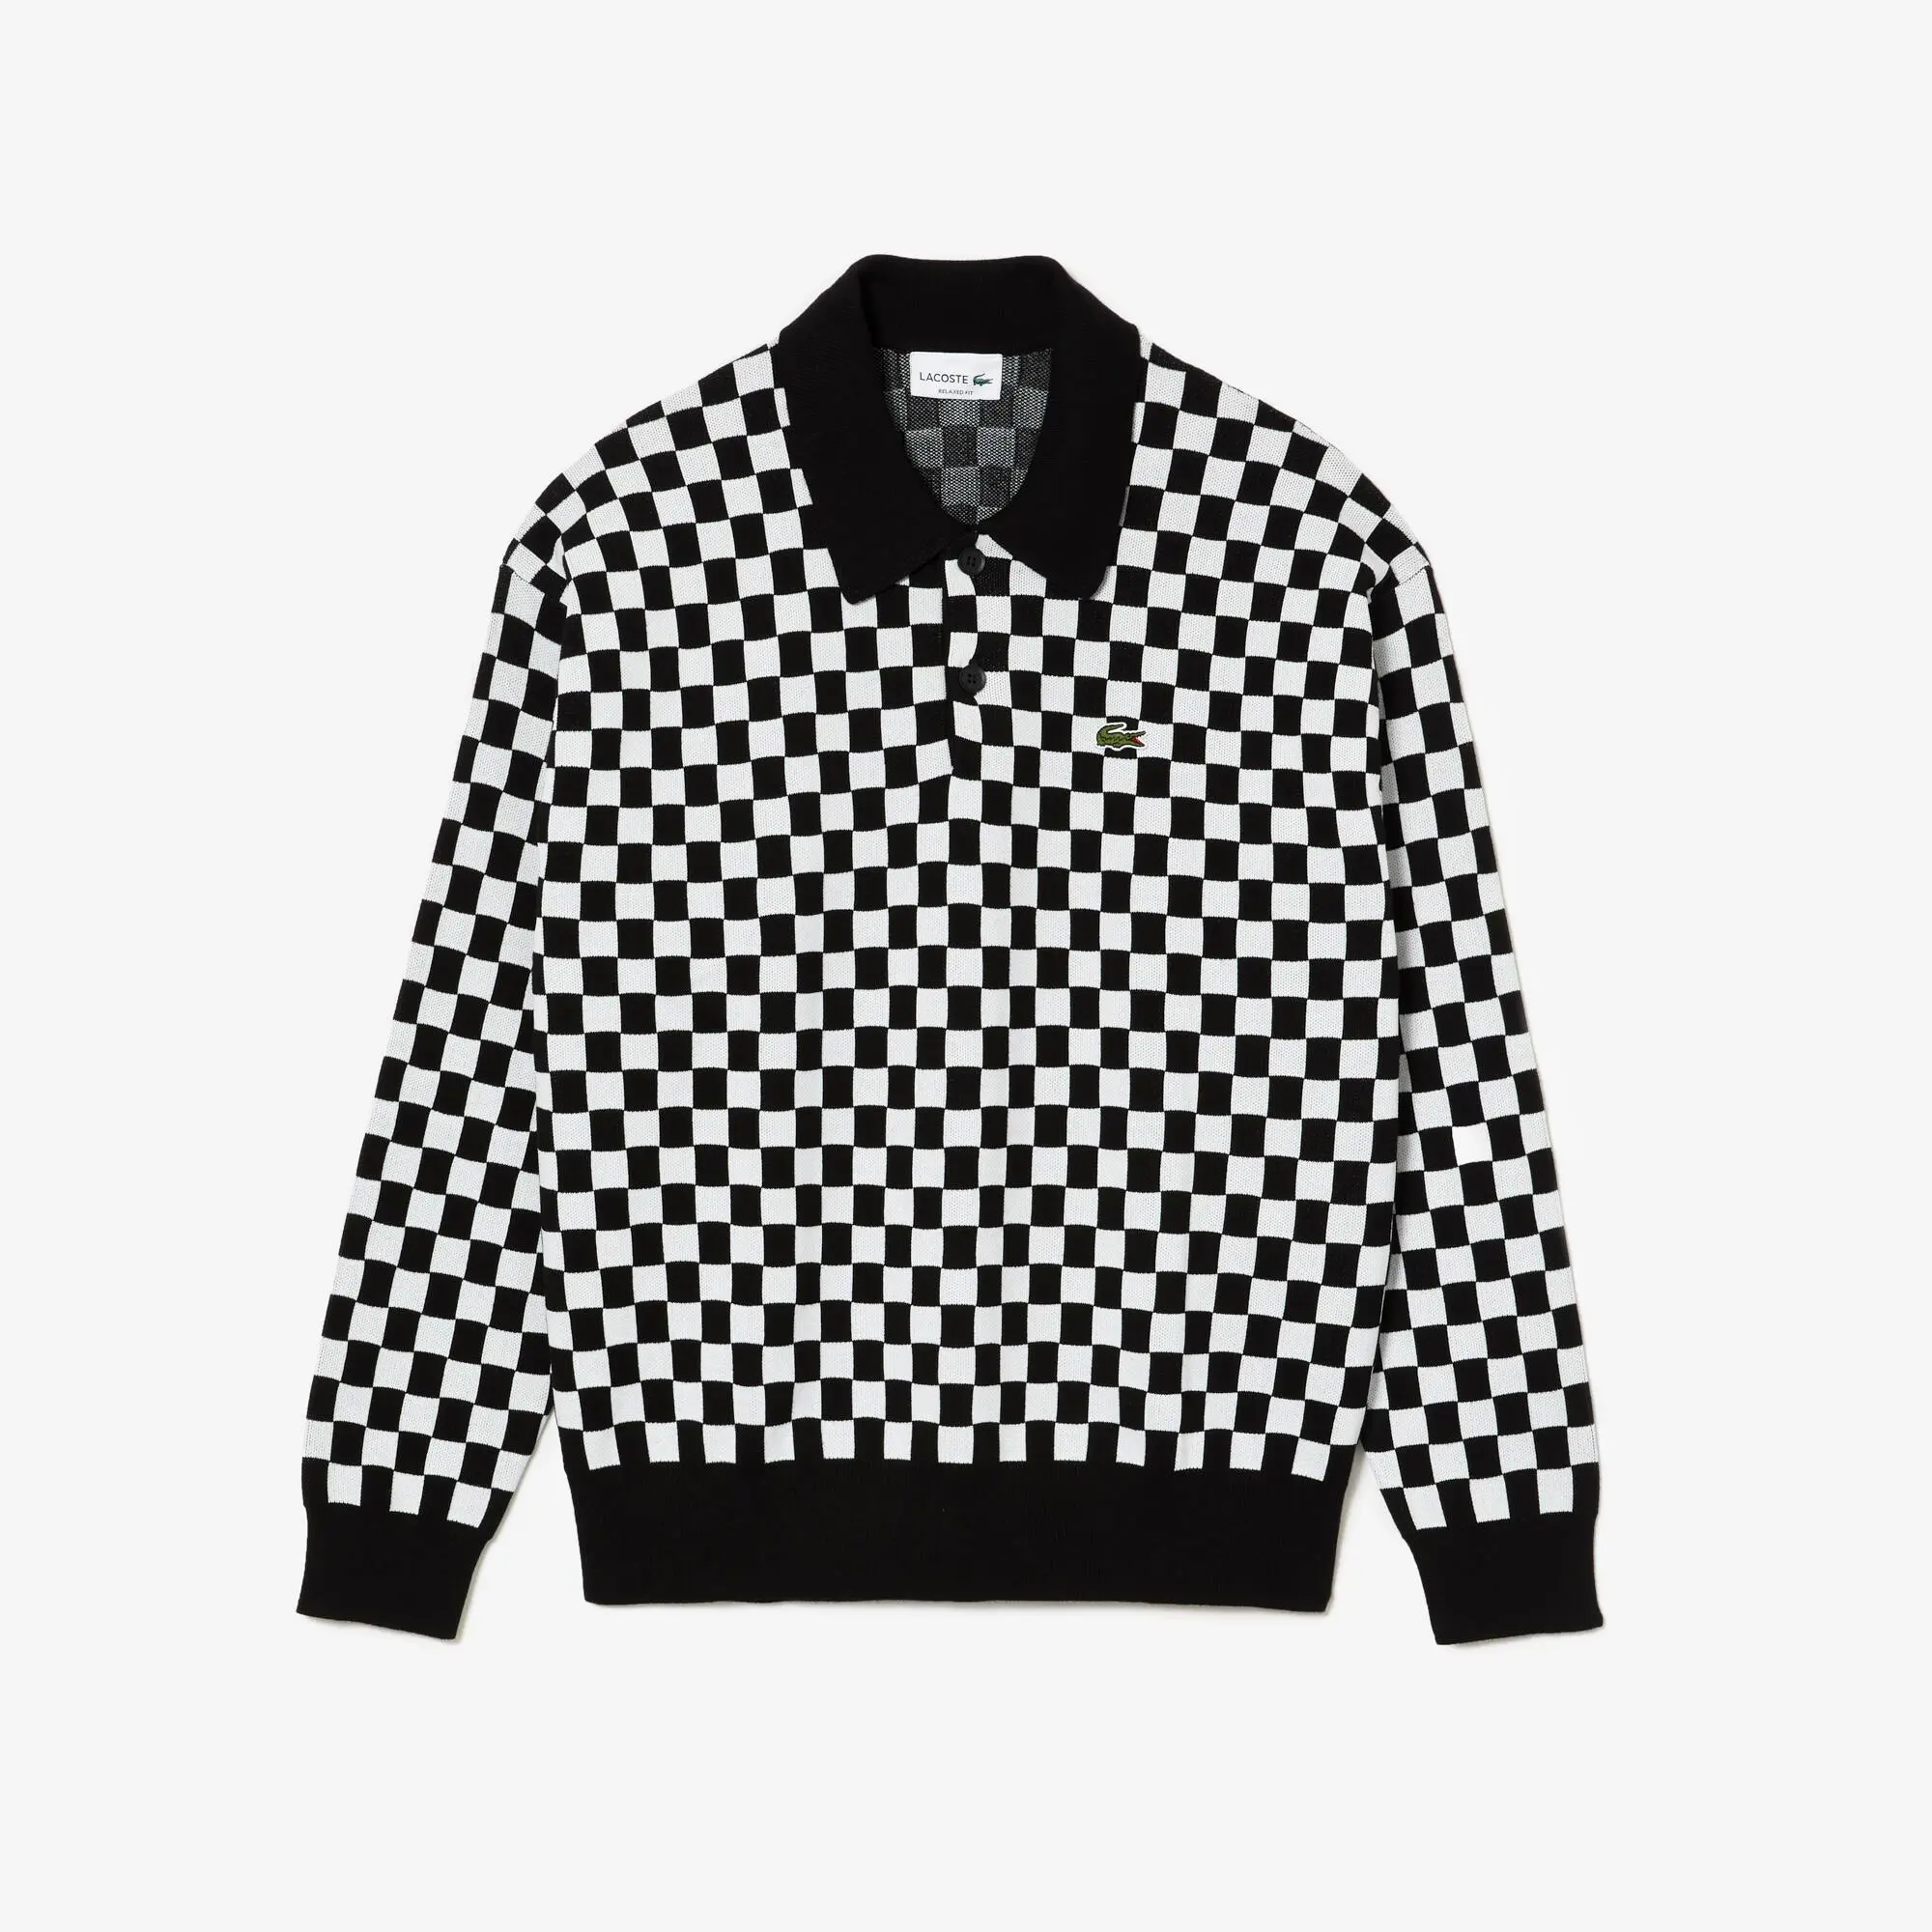 Lacoste Men's Heritage Relaxed Fit Checkerboard Sweater. 2